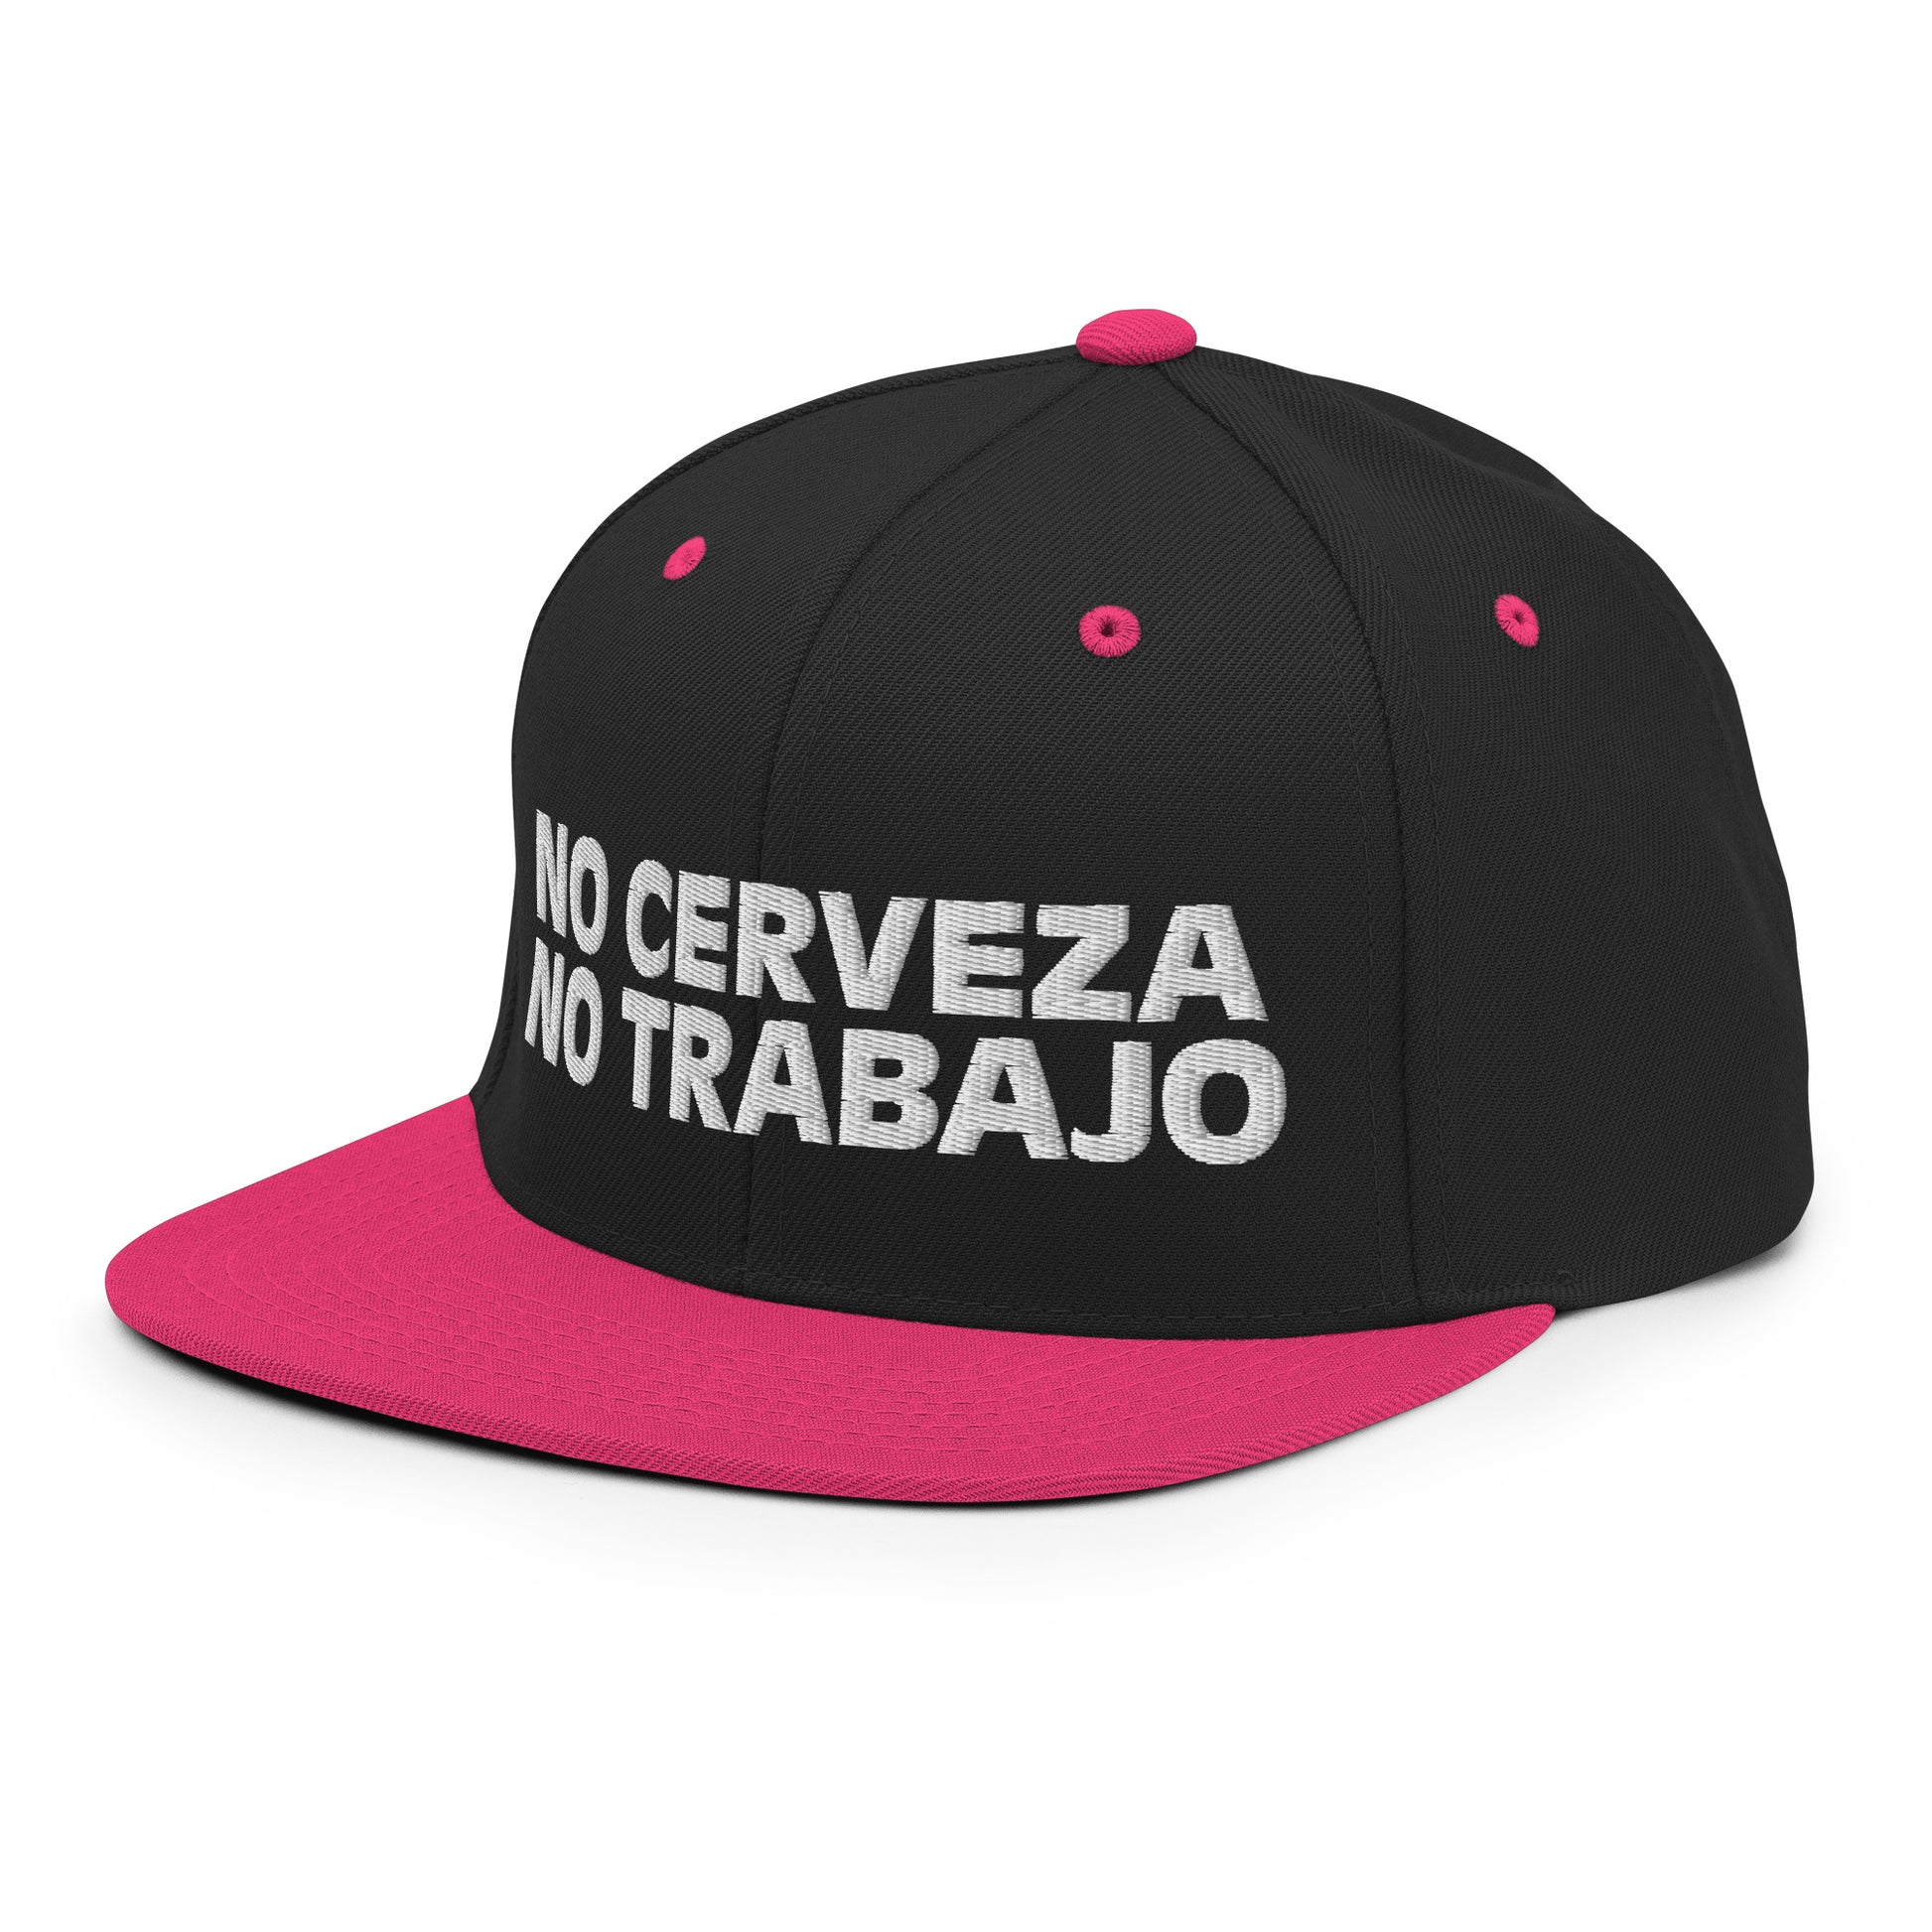 Black snapback hat with neon pink "No Cerveza No Trabajo" text, adjustable fit, inspired by a comedy starring a Chicano comedian. Perfect for men, includes "No Cerveza No Trabajo" meaning.